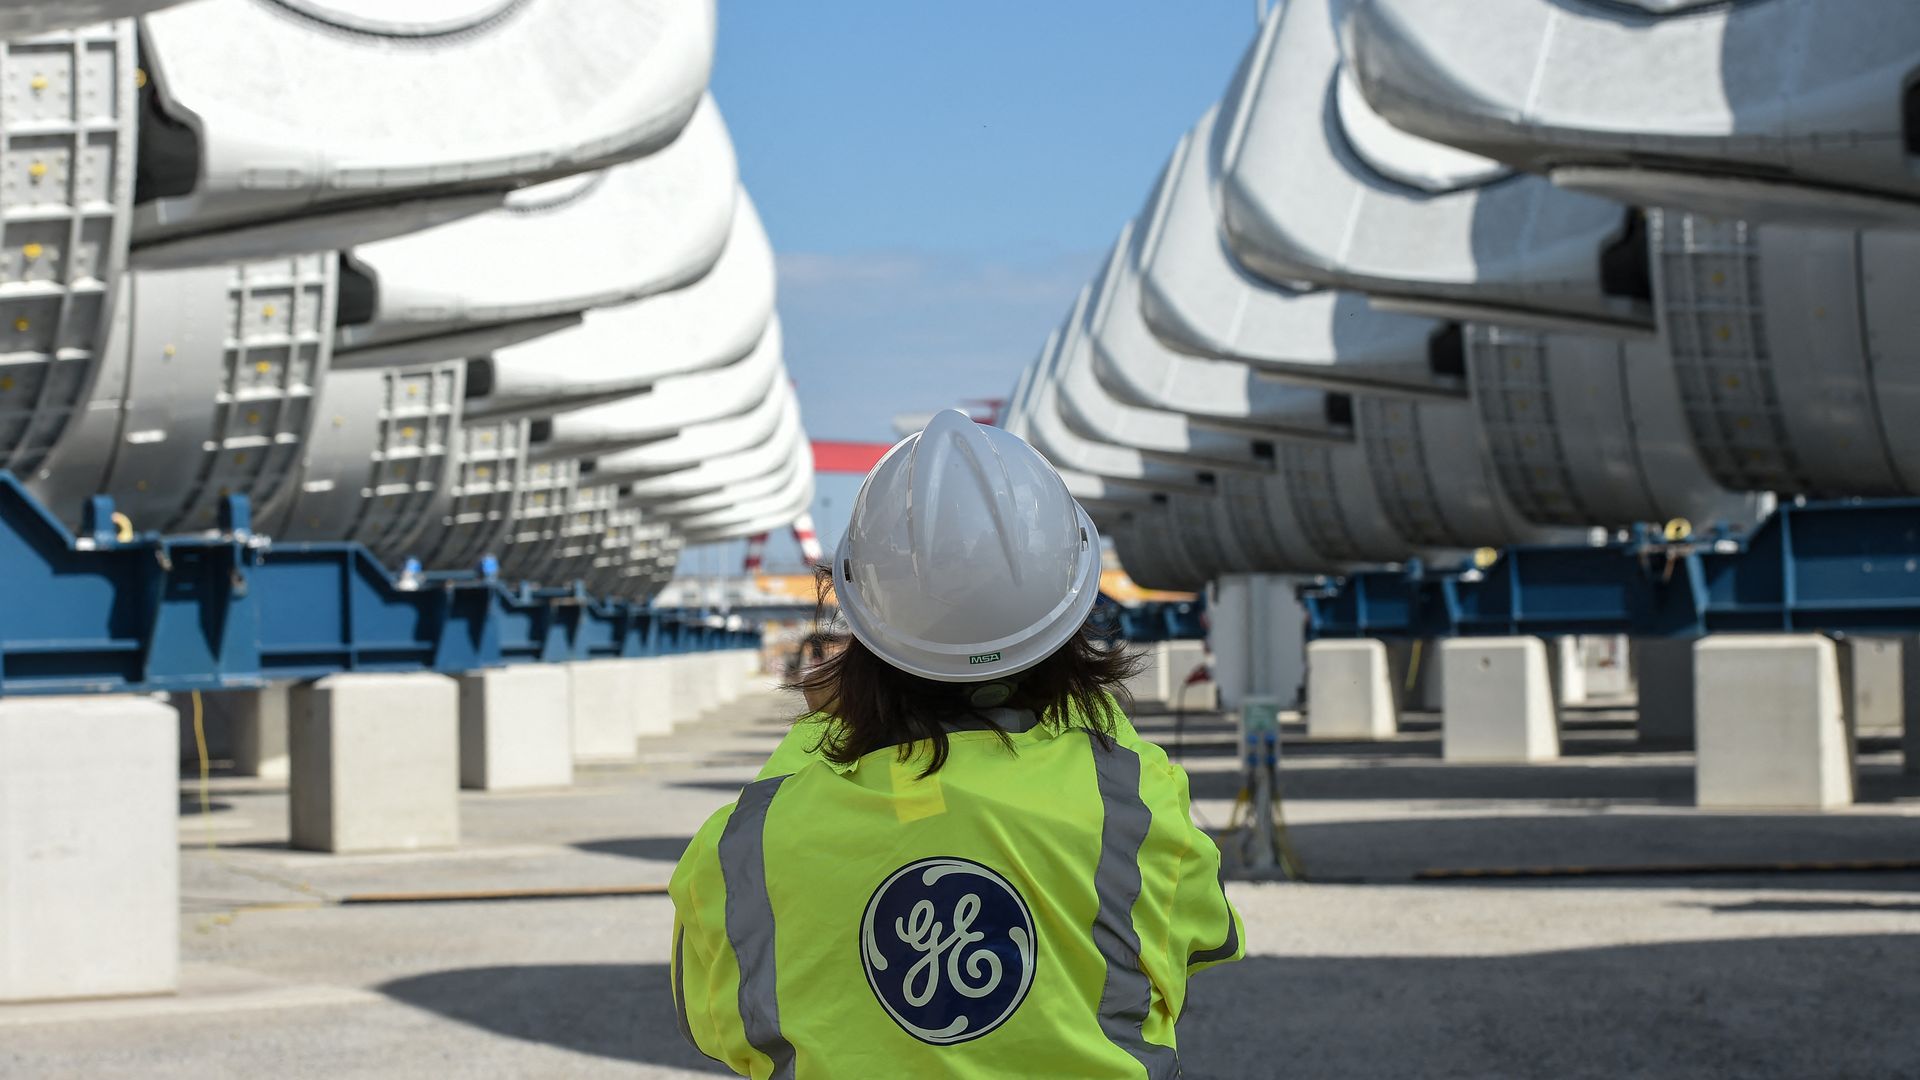 A General Electric employee between wind turbine nacelles during the construction of a wind farm near Saint-Nazaire, France, in September 2021.